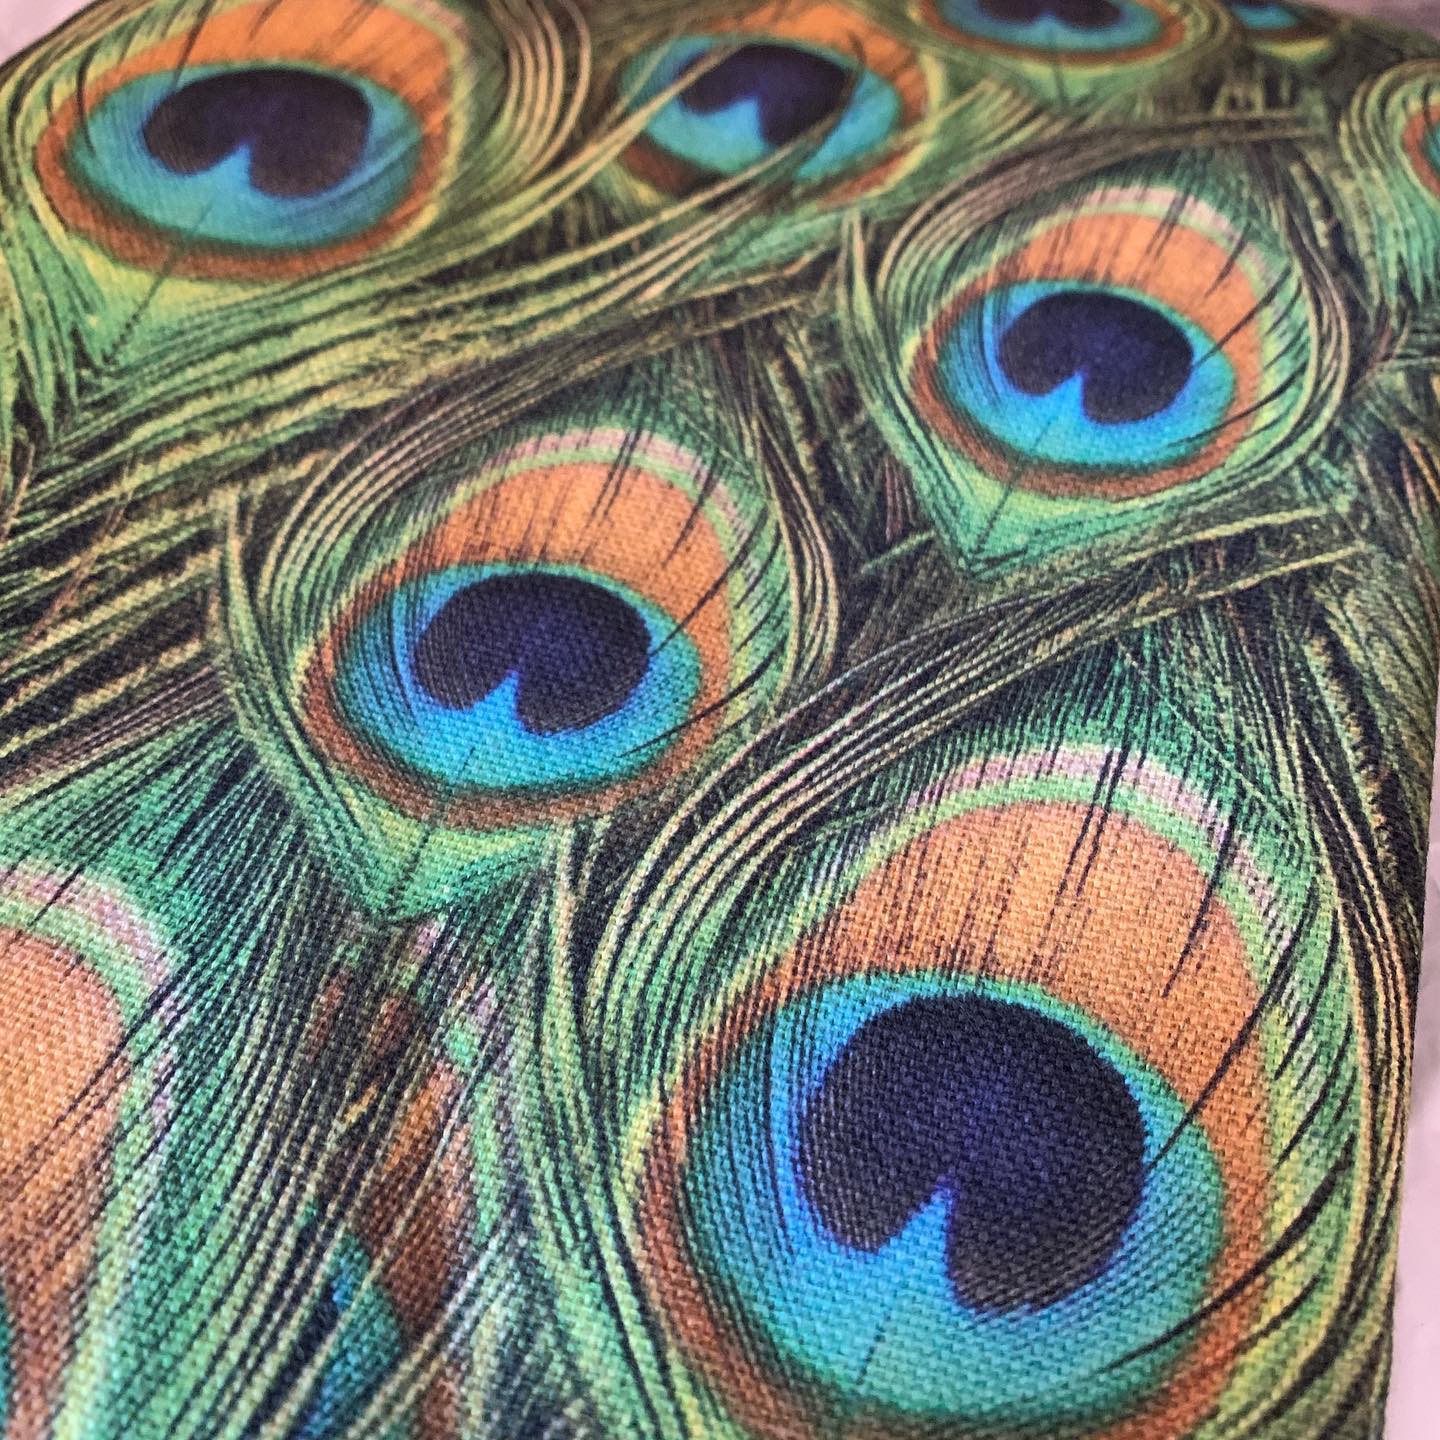 Just got this lovely peacock feather fabric ?!Can’t wait to see what it’ll look like on an ottoman!...#brightandcolourful #peacock #corsham #bird #nature #feathers #handcrafted #homewares #ginger #tweed #upholster #fabricobsessed